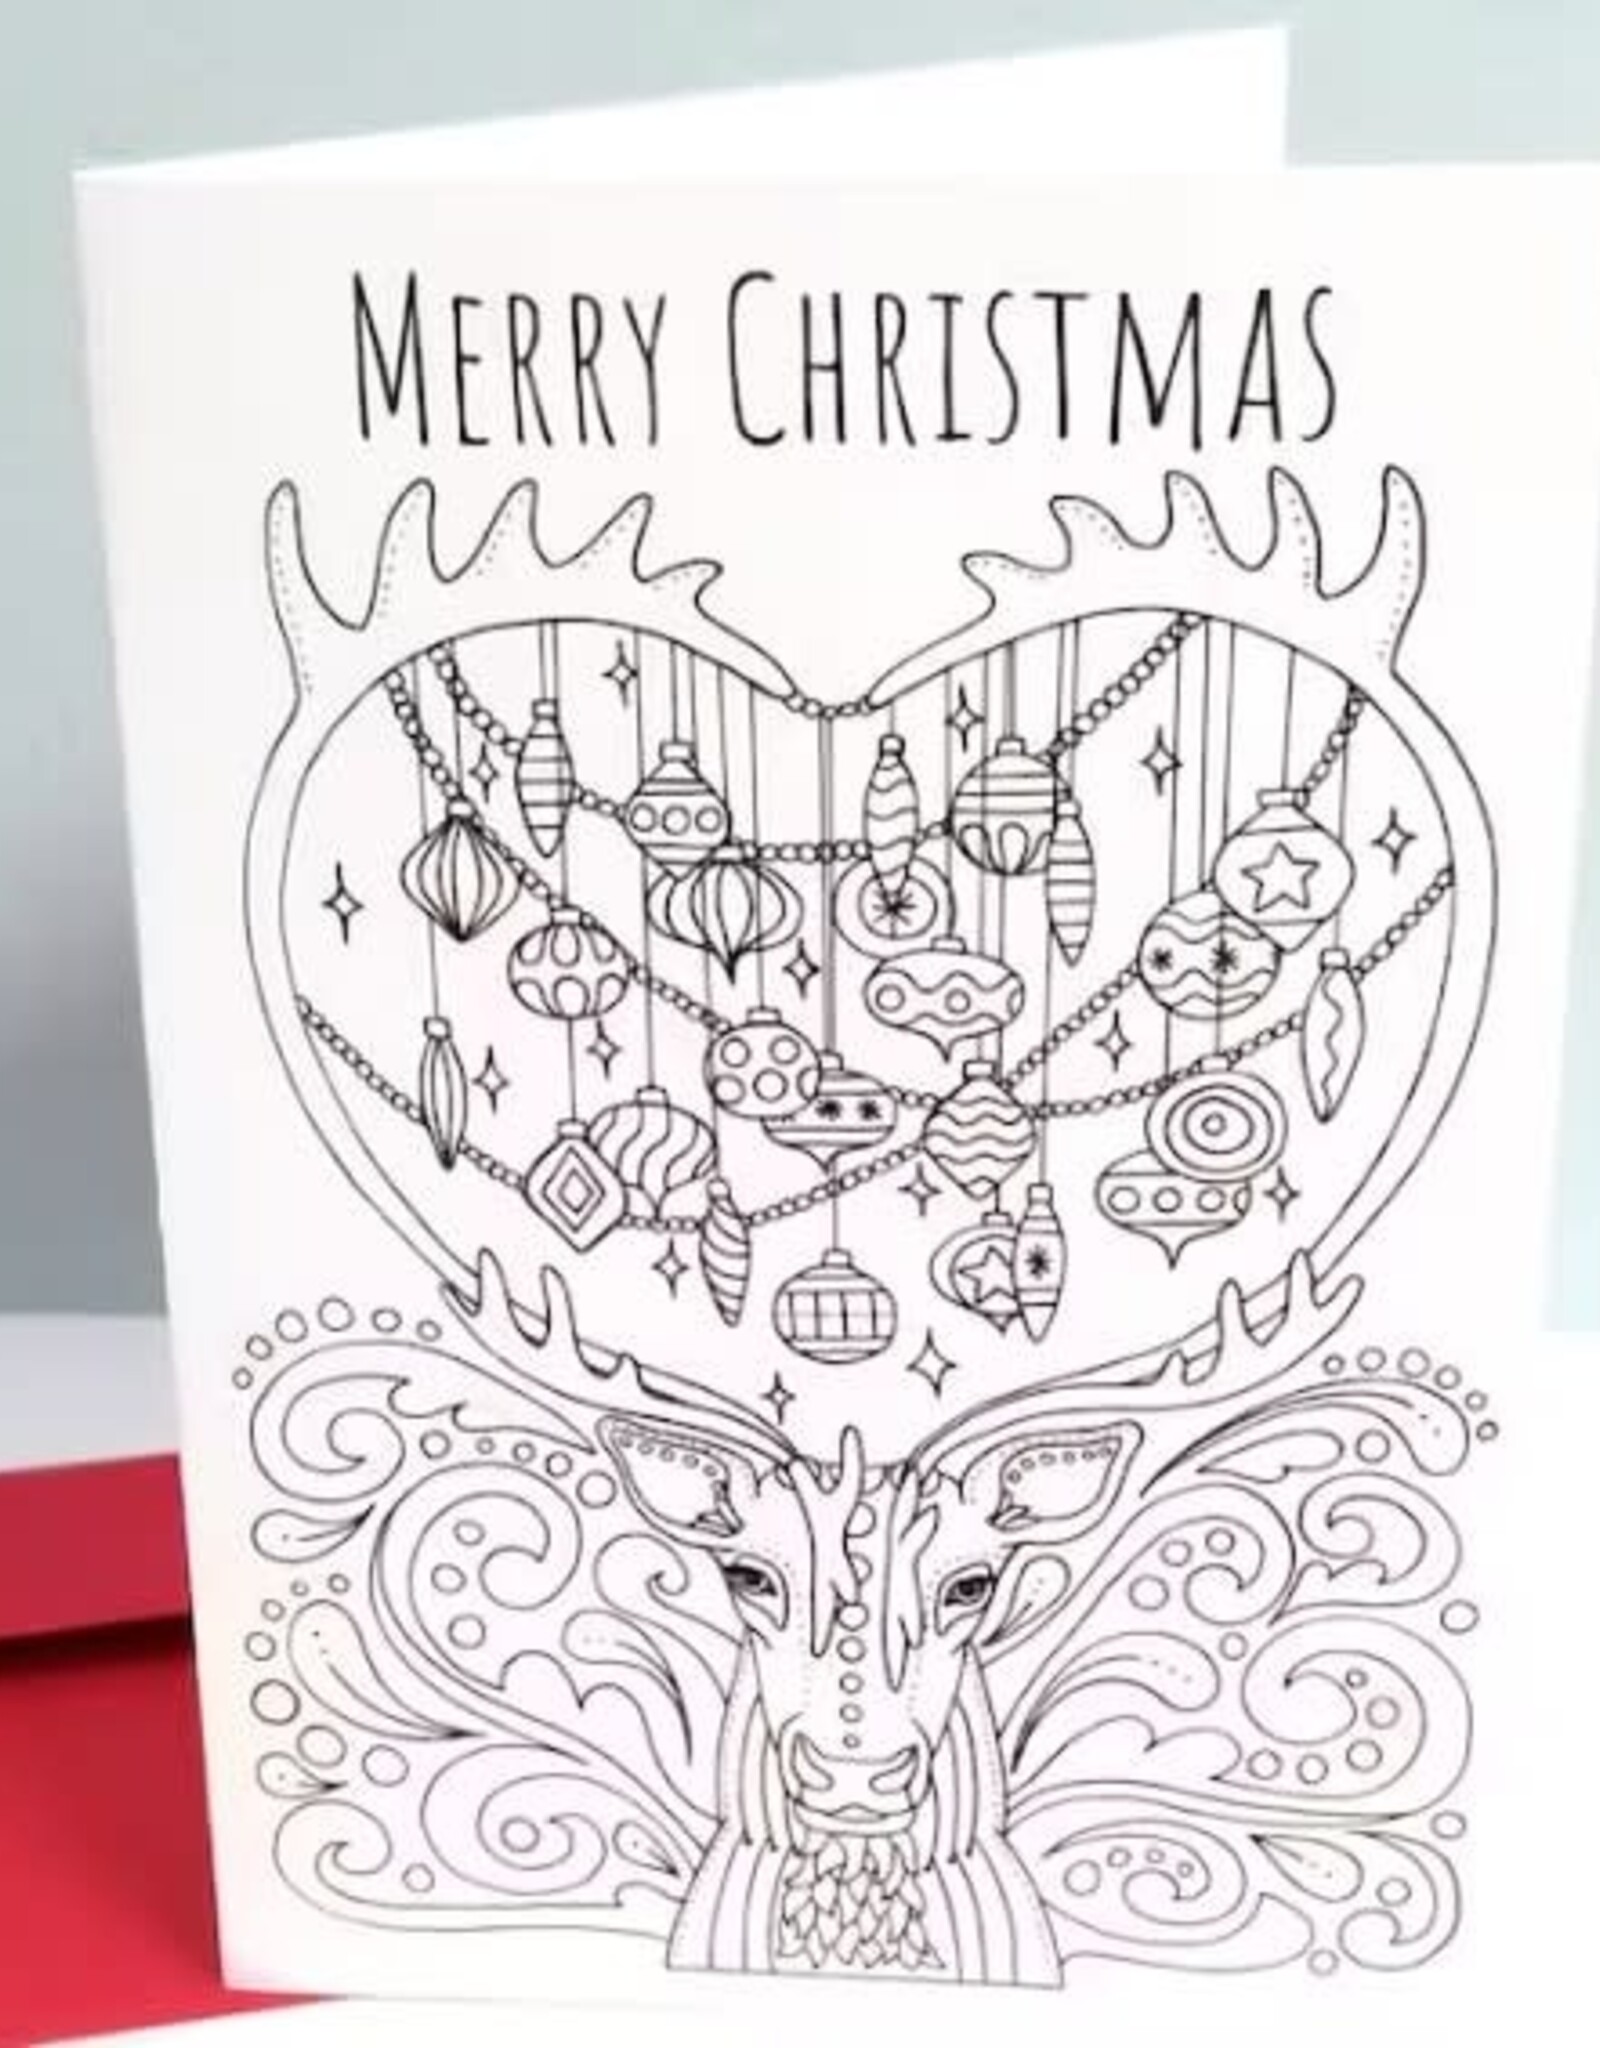 Merry Christmas Reindeer - Colouring Card